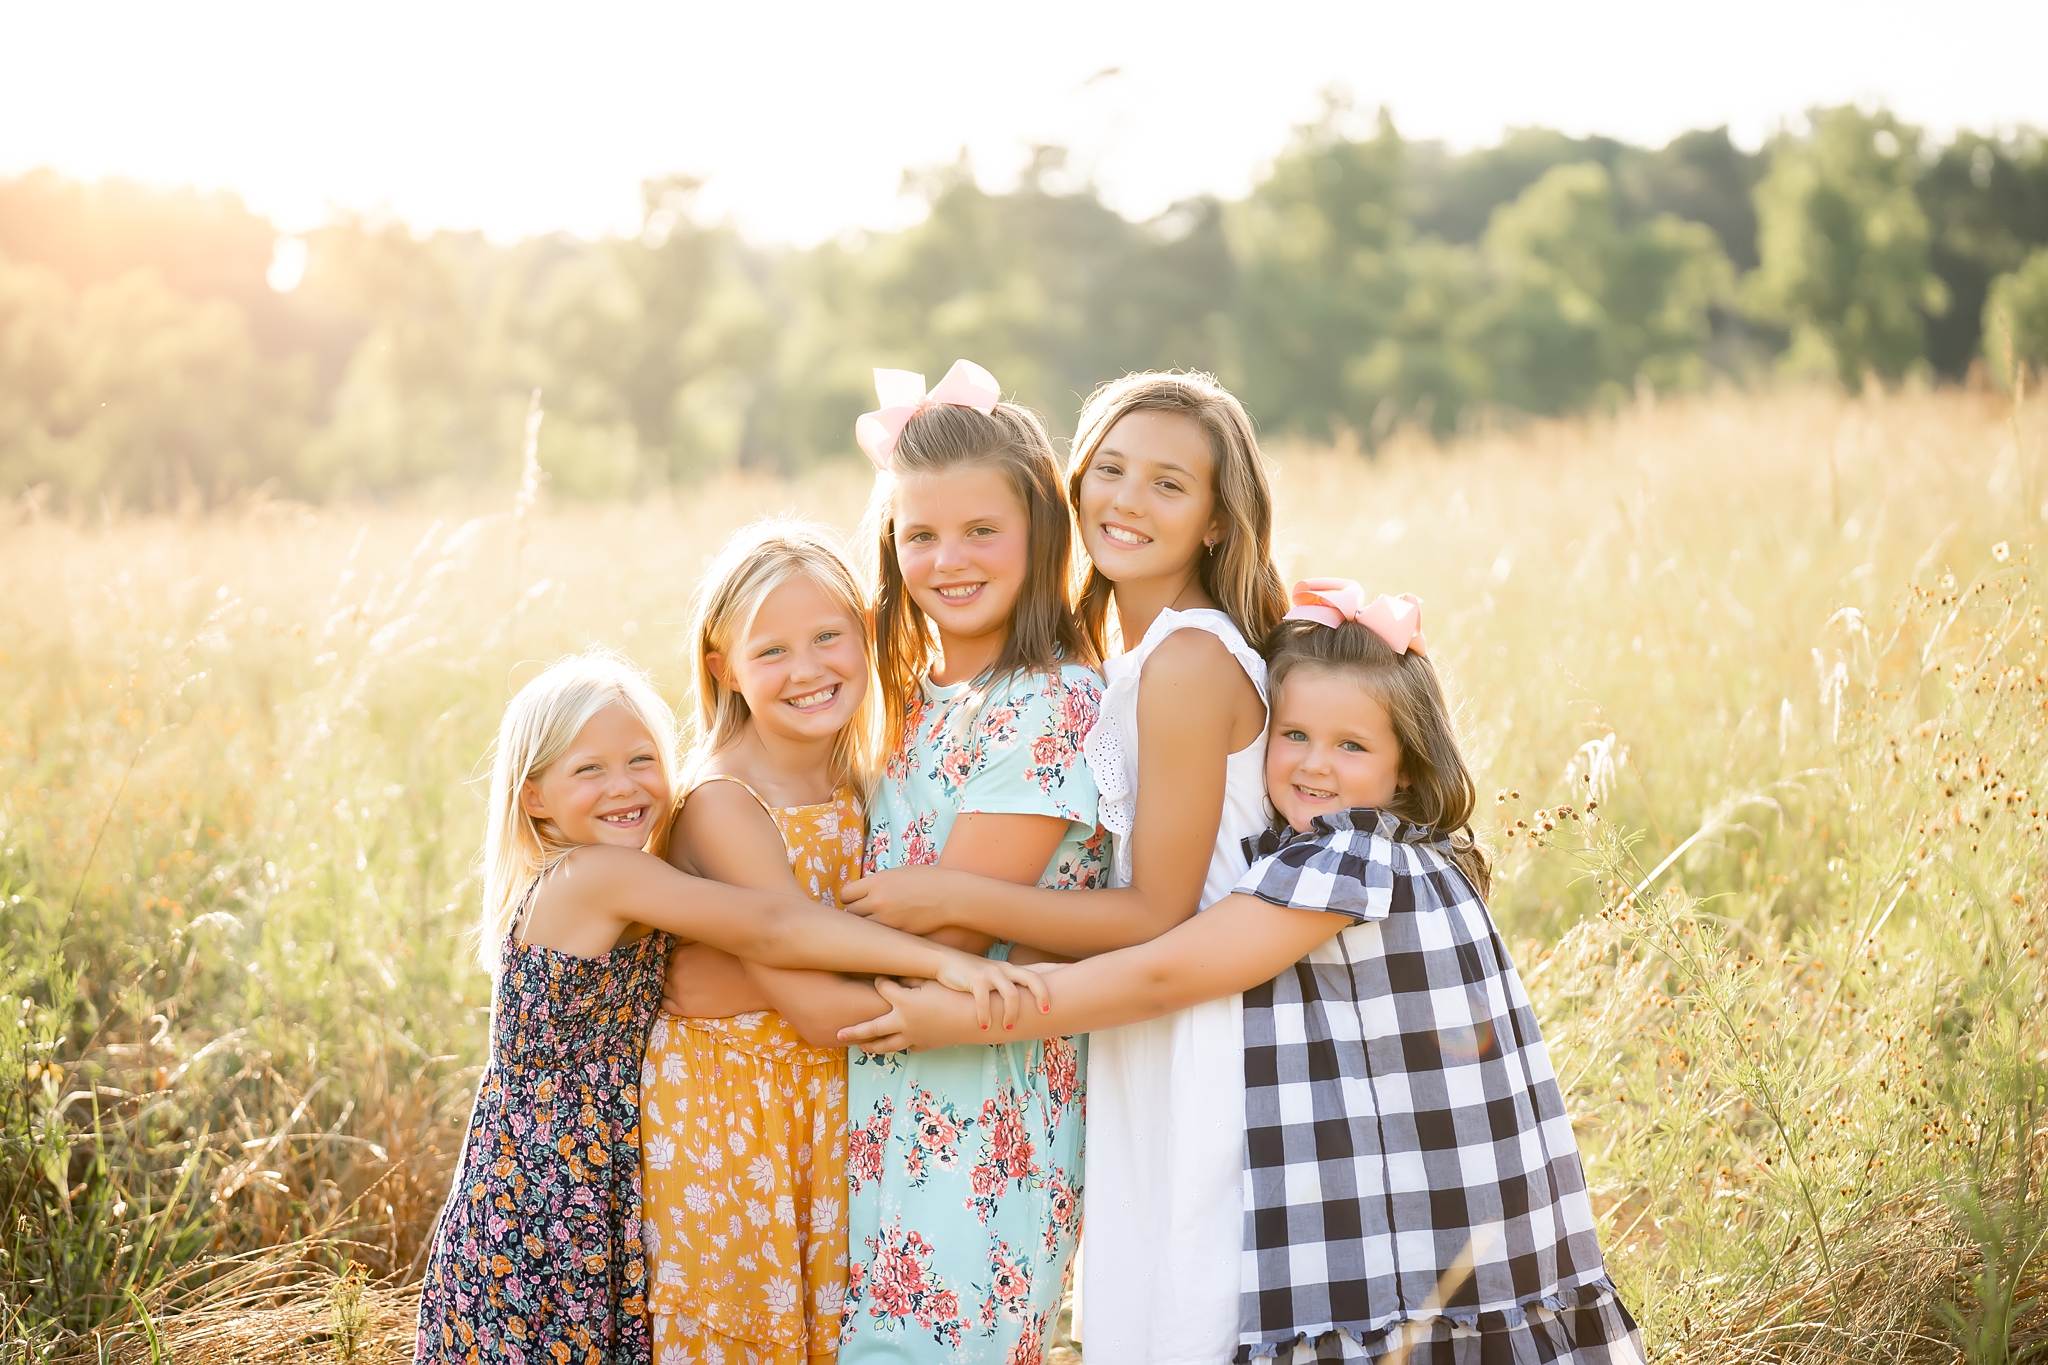 Family Photography Poses and Ideas